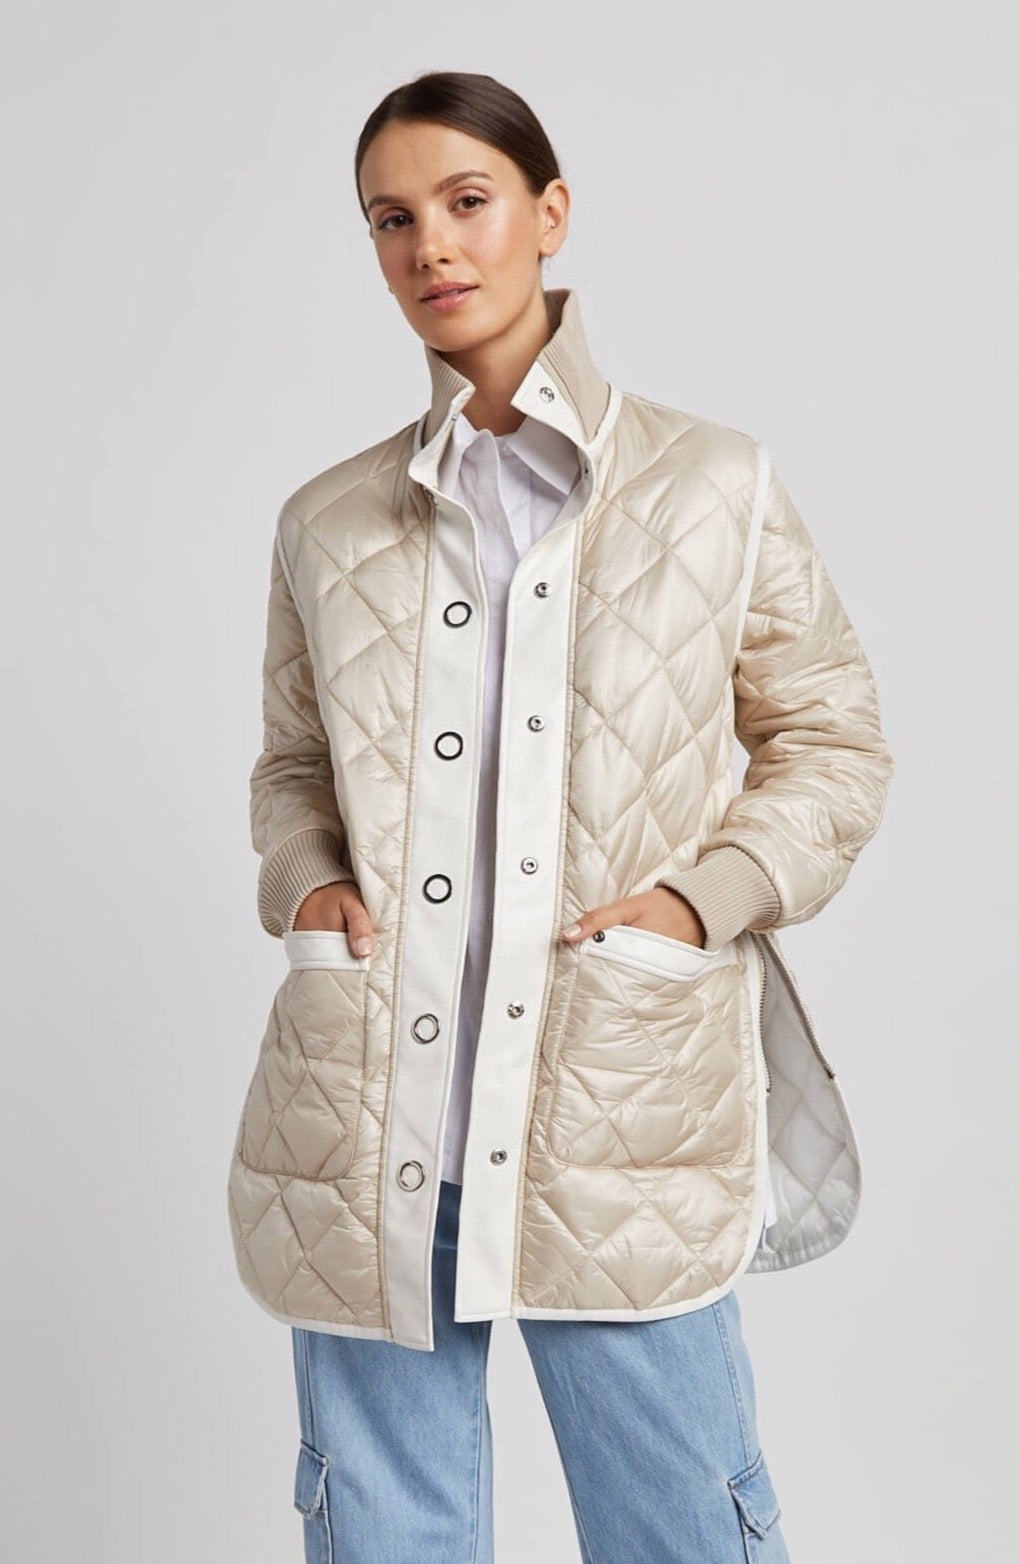 Adroit Atelier Nadine Reversible Quilted Coat With Vegan Leather Trim - Champagne/White